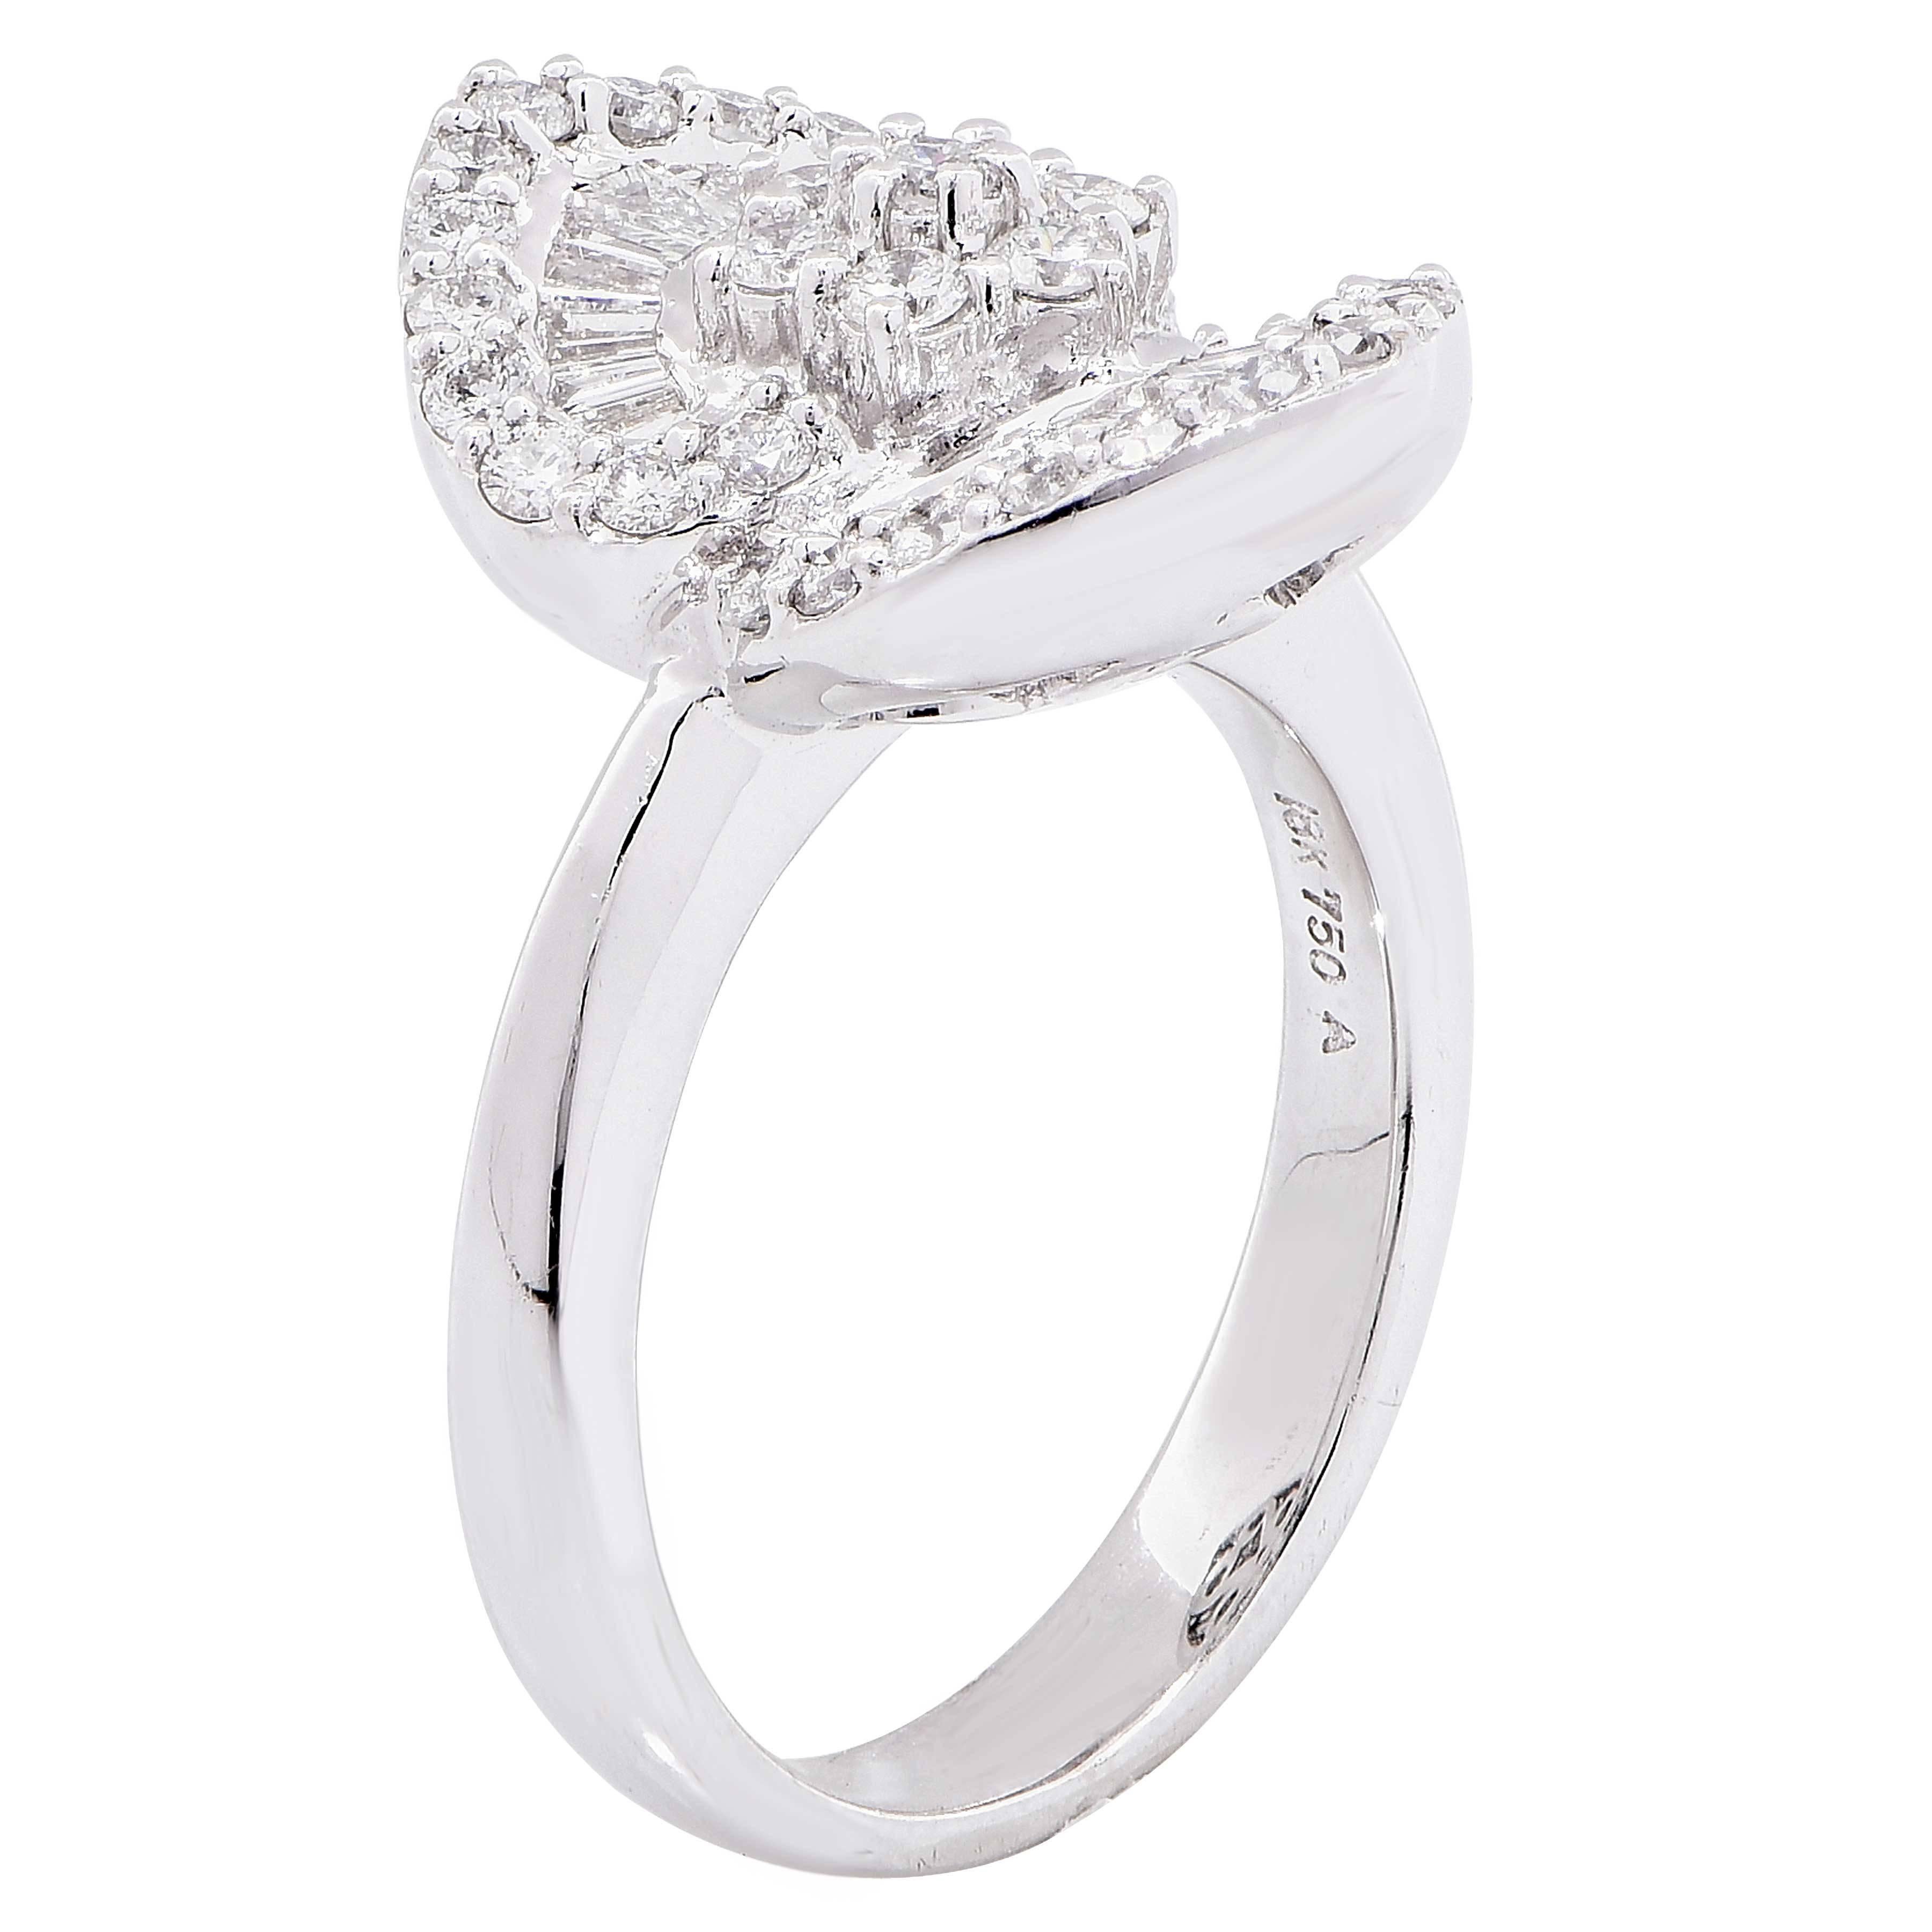 1.25 Carat Diamond White Gold Flower Cocktail Ring For Sale 1